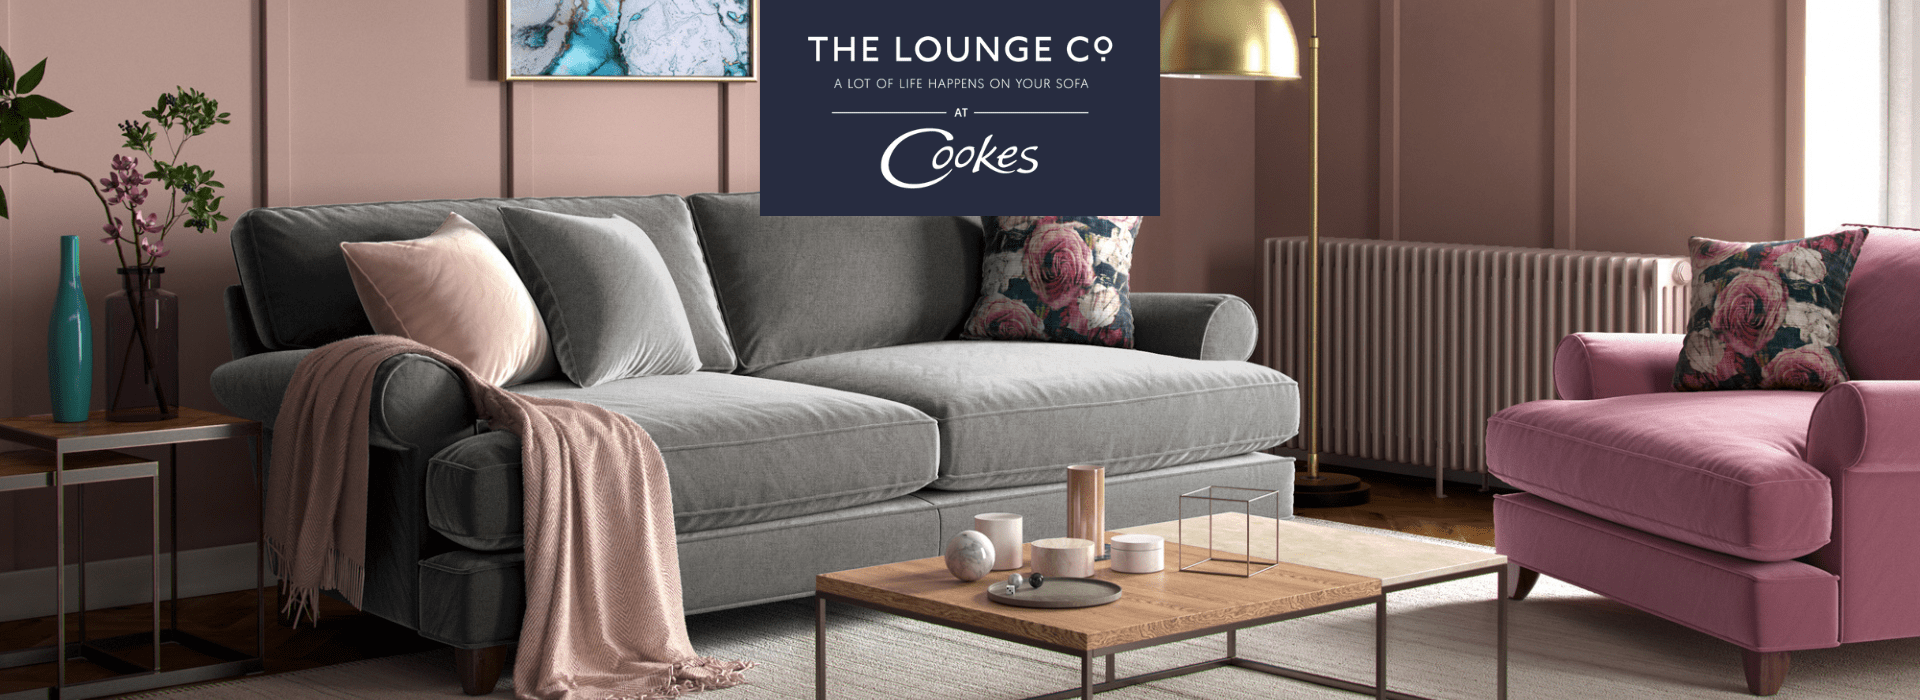 The Lounge Co Briony Landing Page Banner 